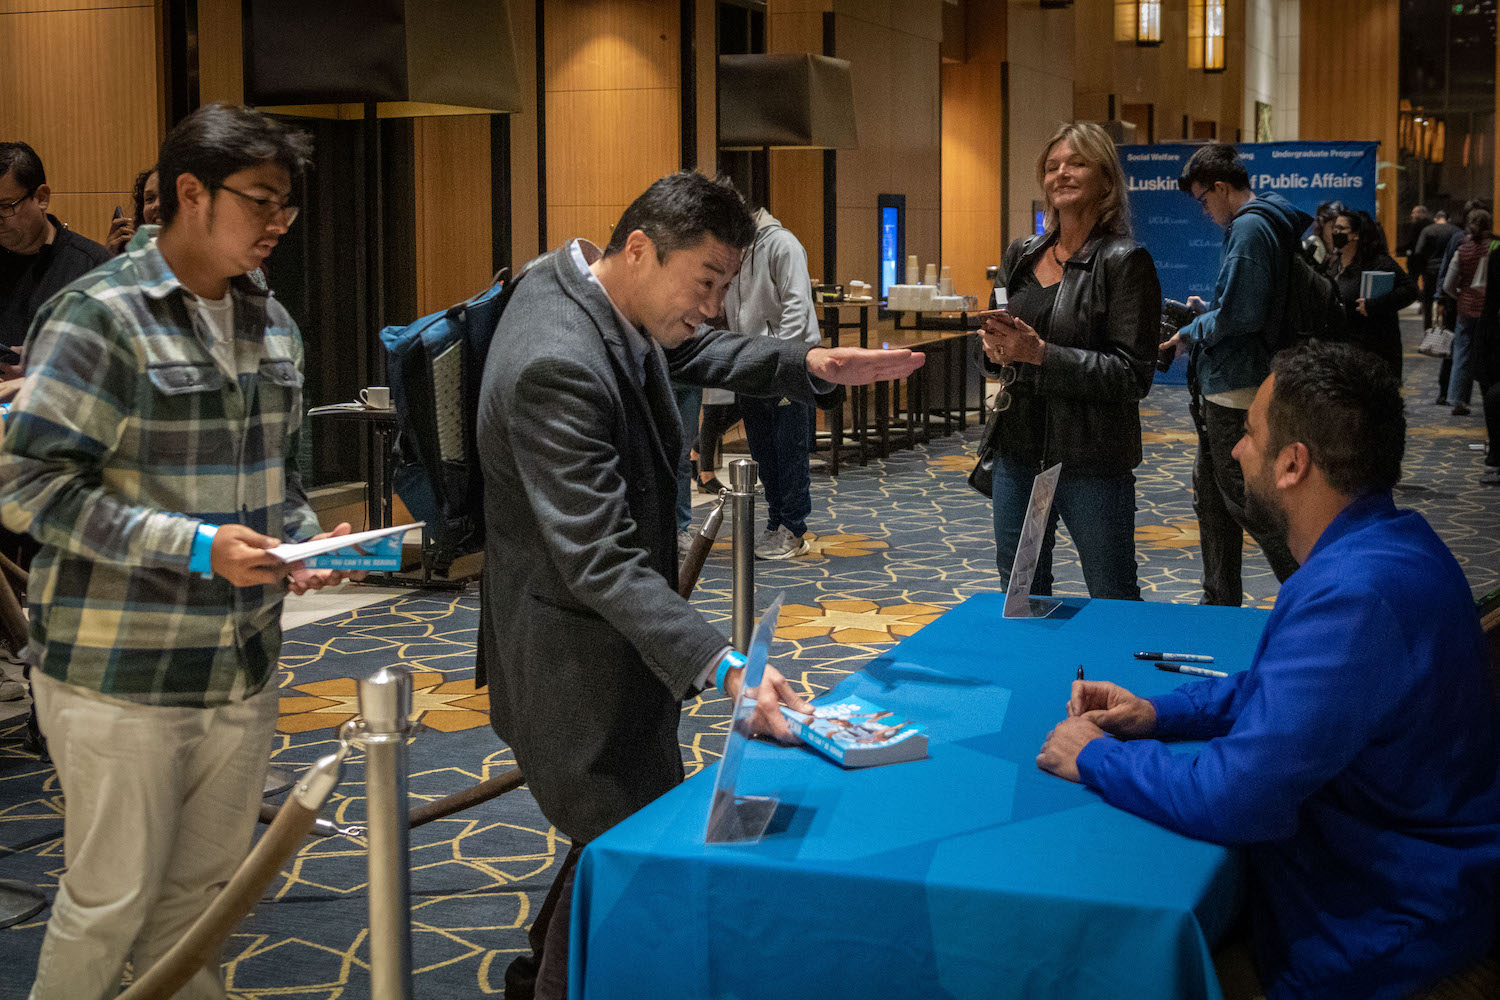 Man at desk signing books in conference center lobby